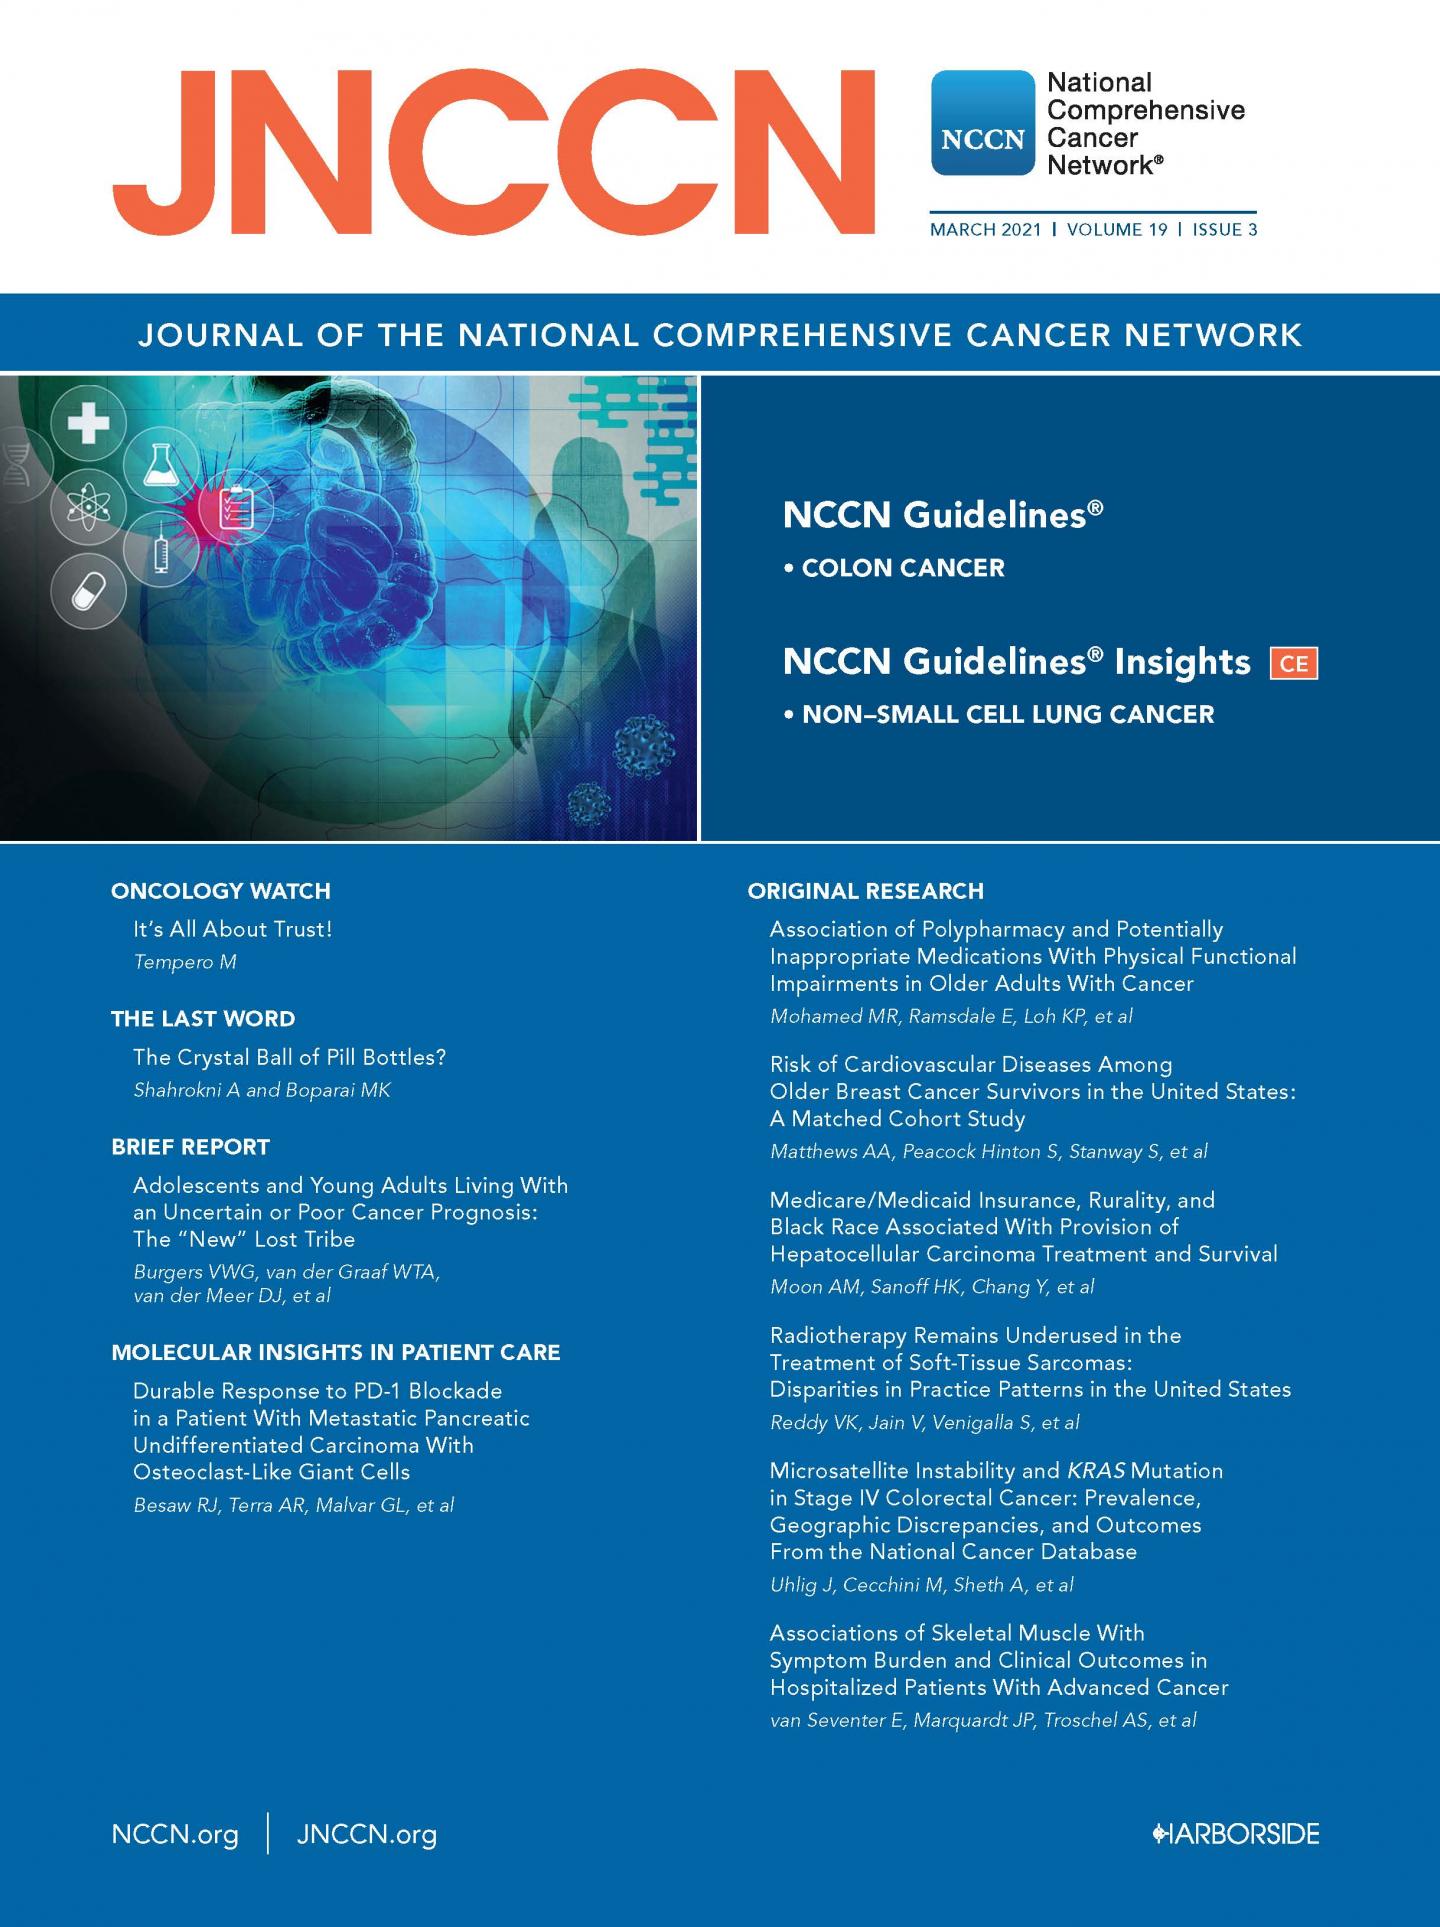 JNCCN March 2021 Cover